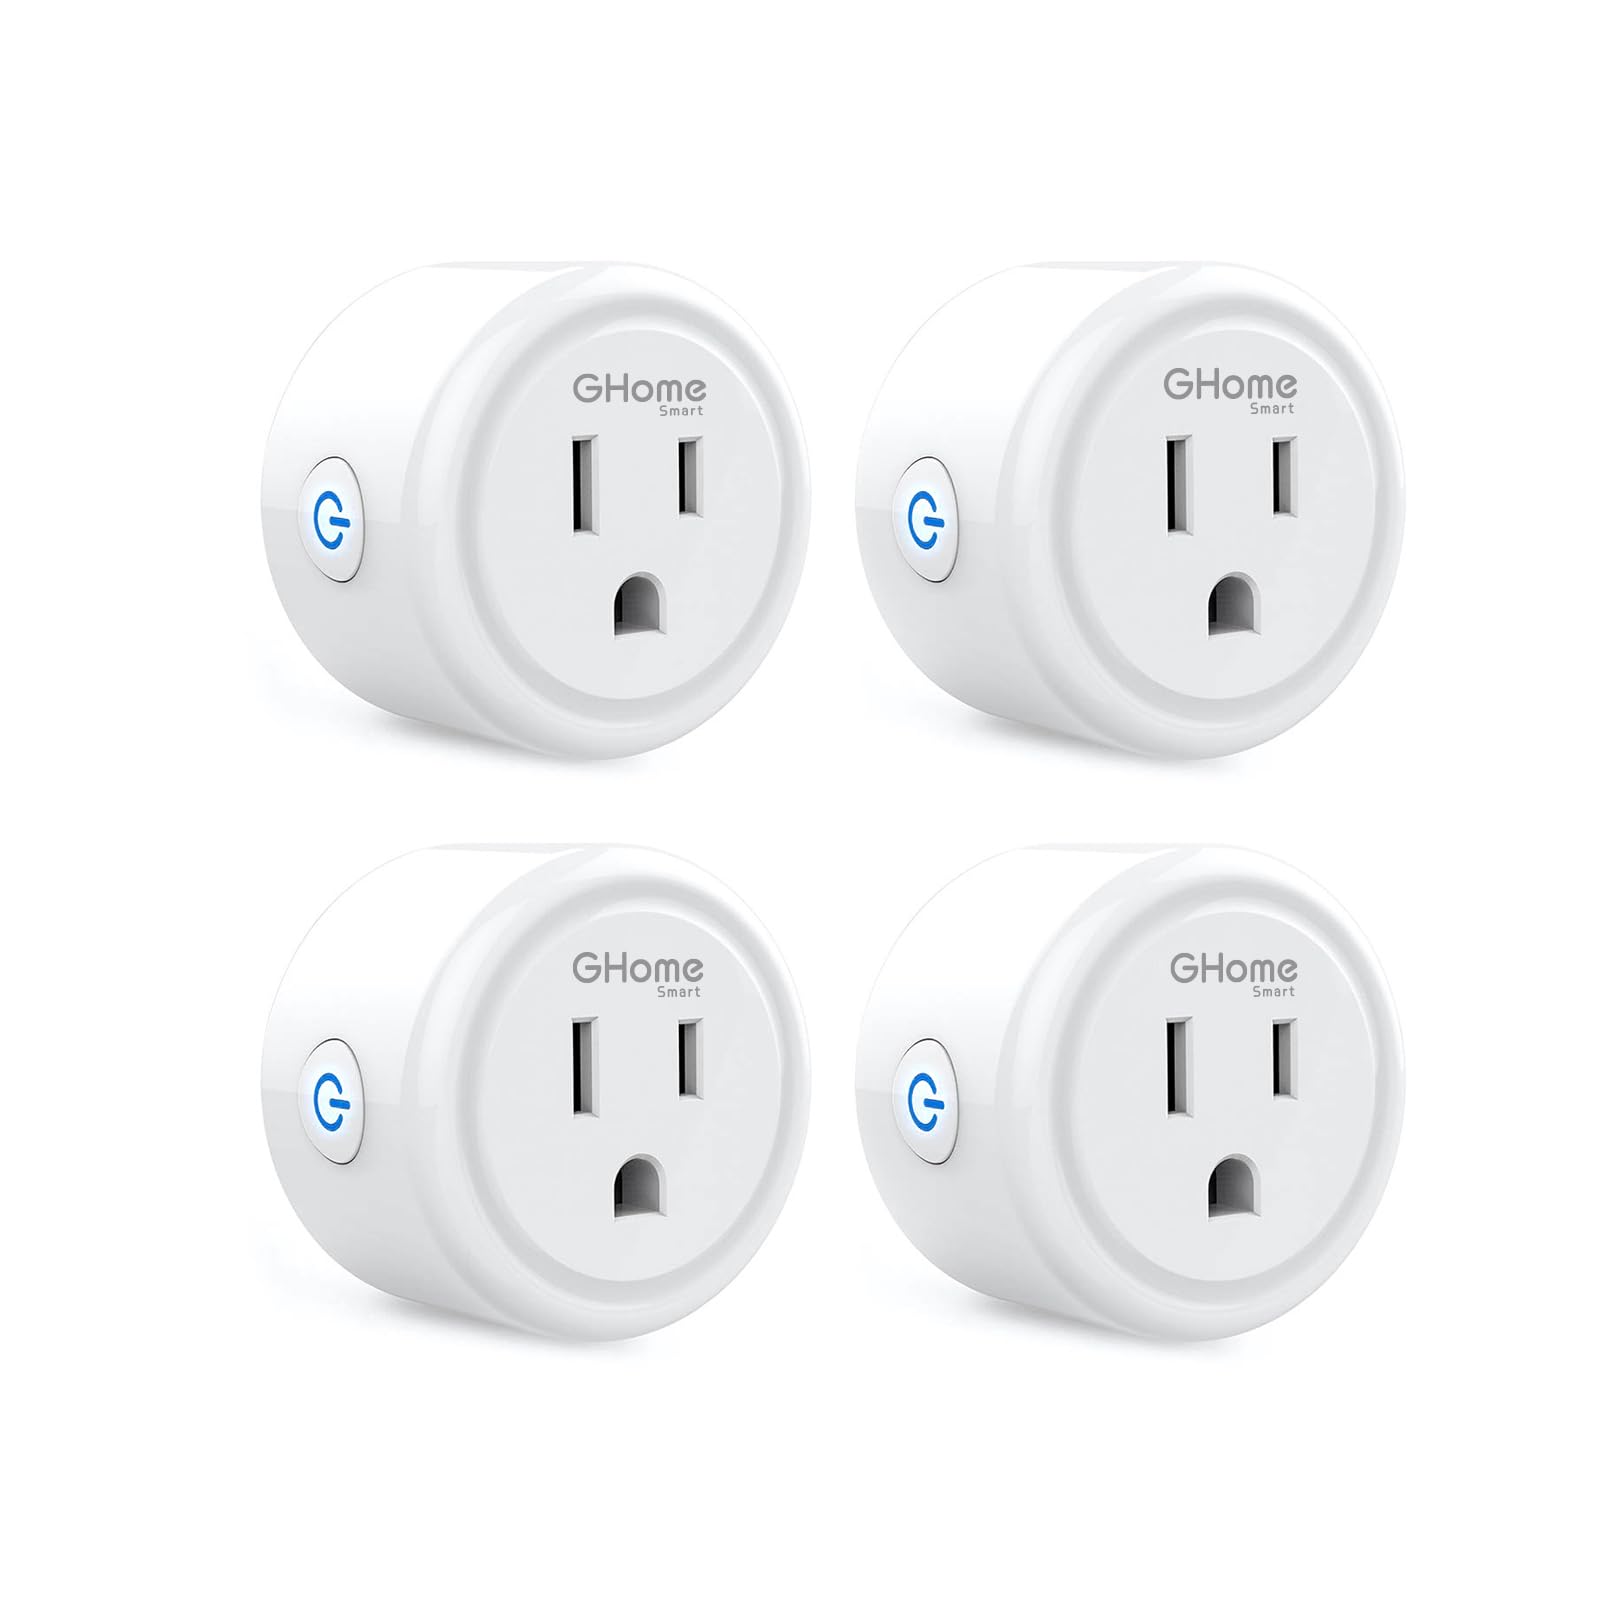 GHome Smart Mini Smart Plug - WiFi Outlet Socket Compatible with Alexa & Google Home with Timer Function, ETL FCC Listed, 2.4GHz Network, No Hub Required (4 Pack), White (WP3-4)